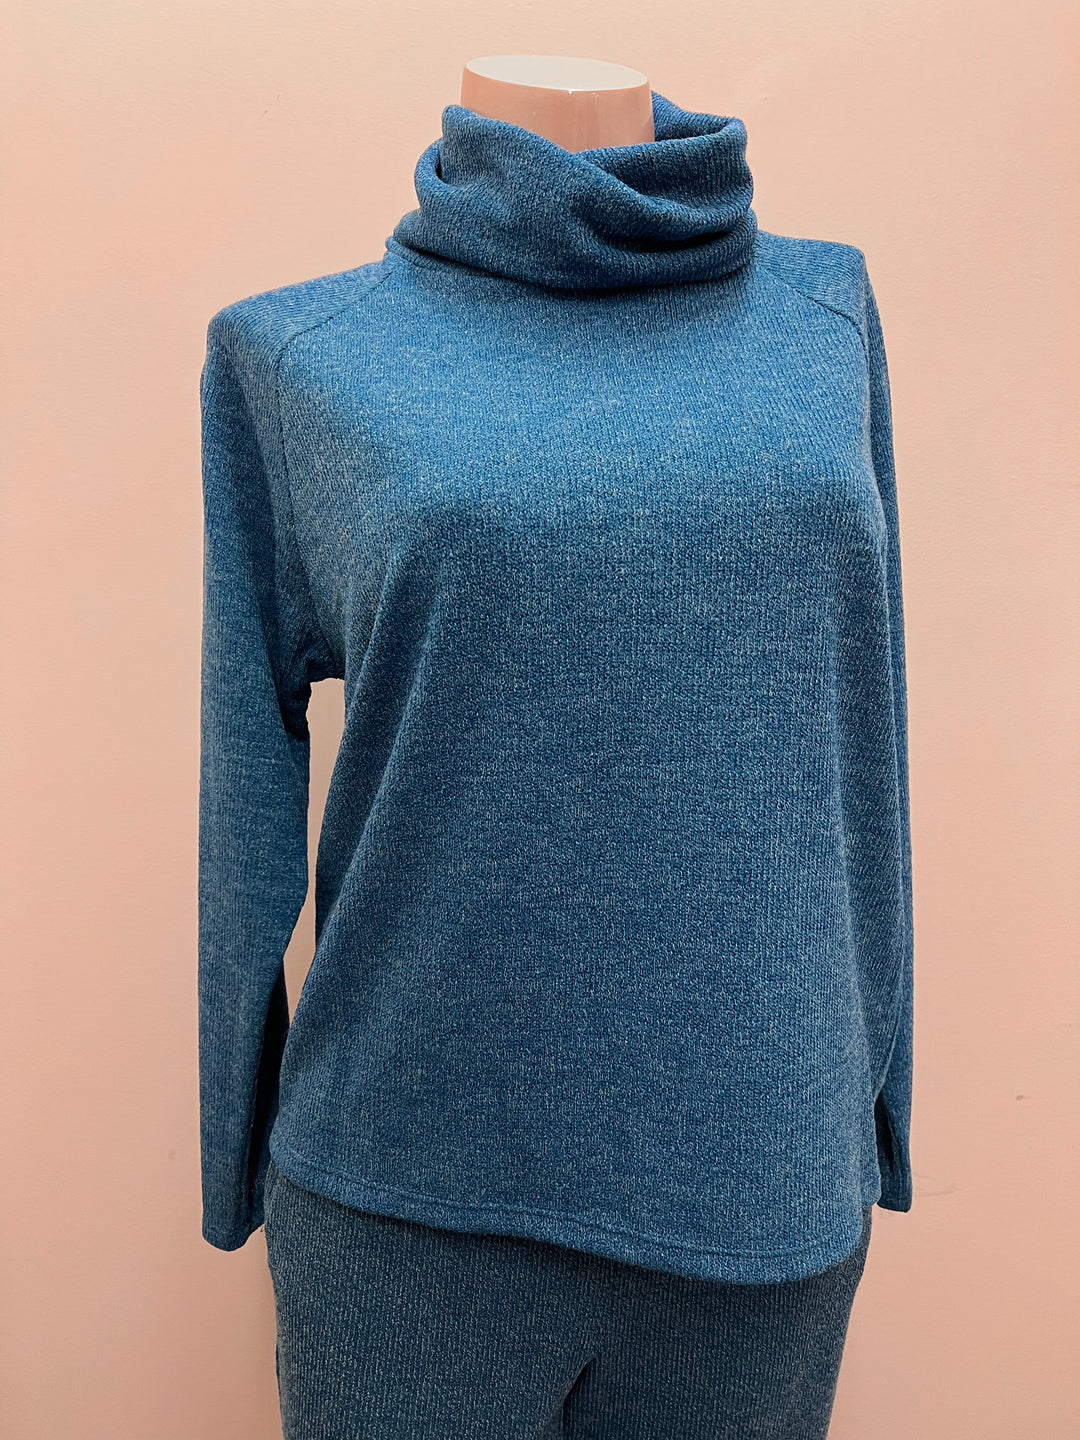 Soft Works Cowl Neck Sweater - Size Large